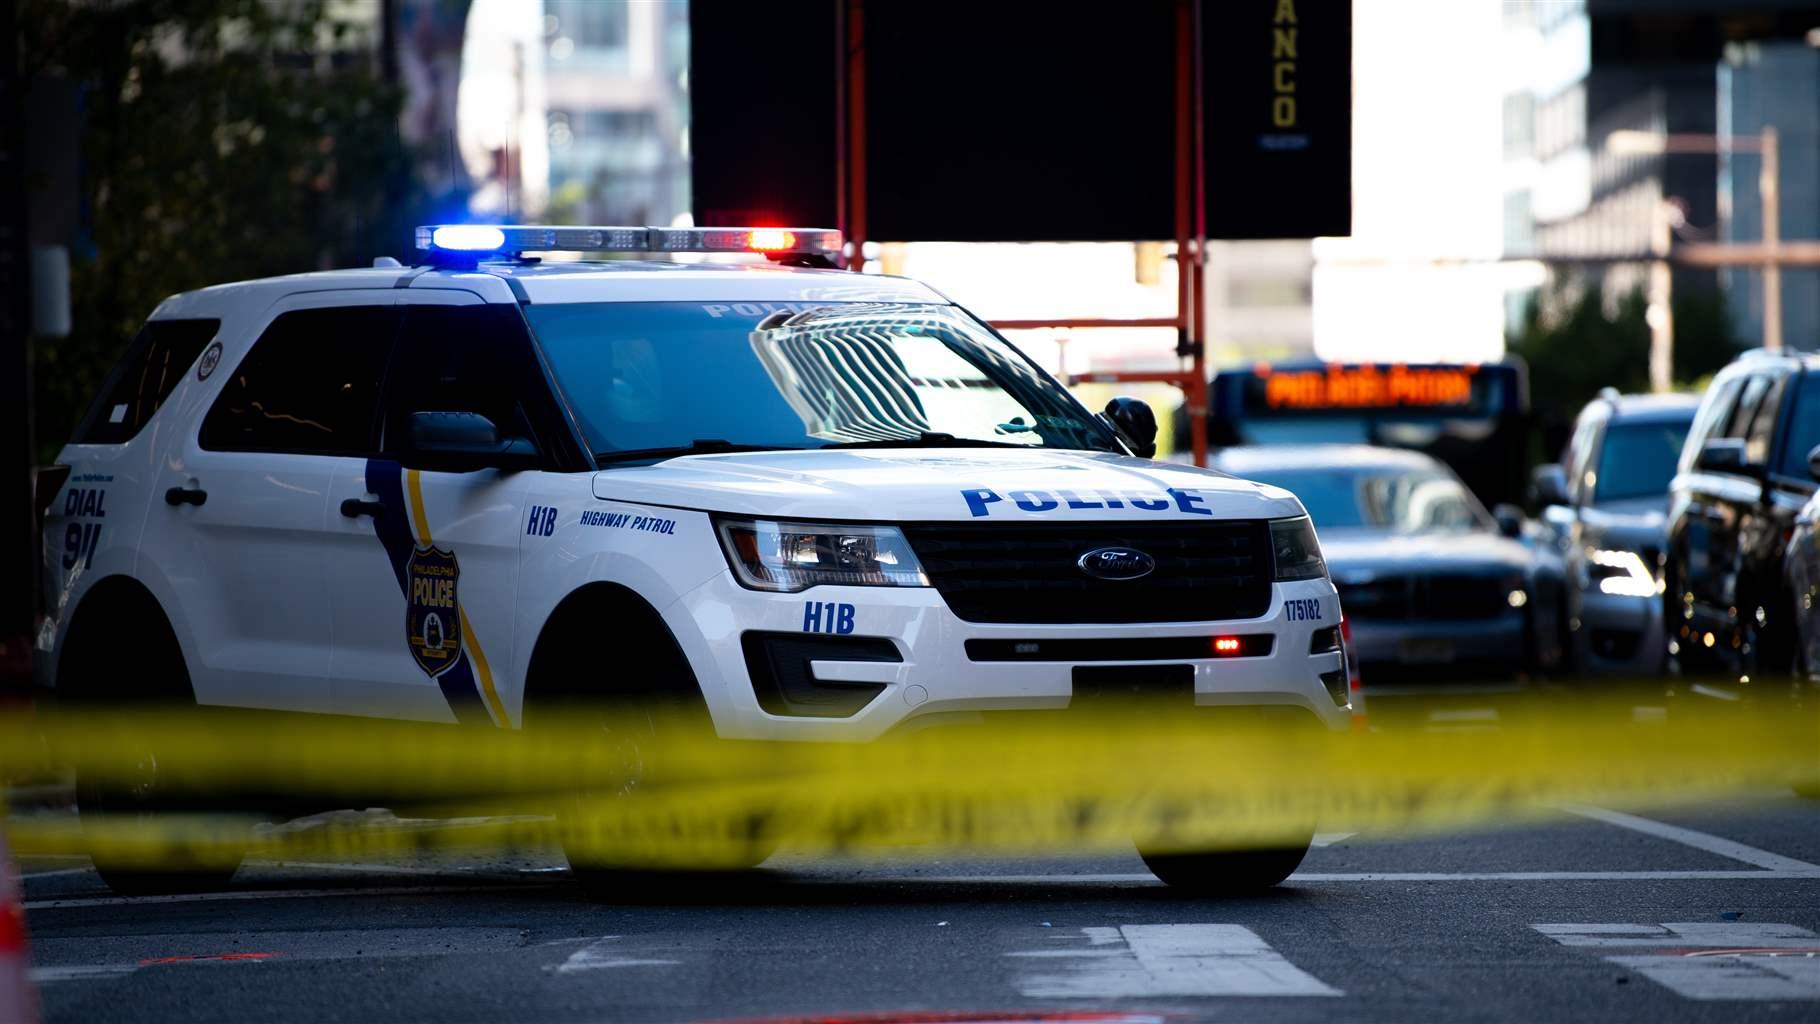 Yellow crime scene tape is blurred in the foreground with a white police SUV in focus behind it. The blue and red lights atop the vehicle are flashing, and the word “Police” appears in blue capital letters across the front of the hood